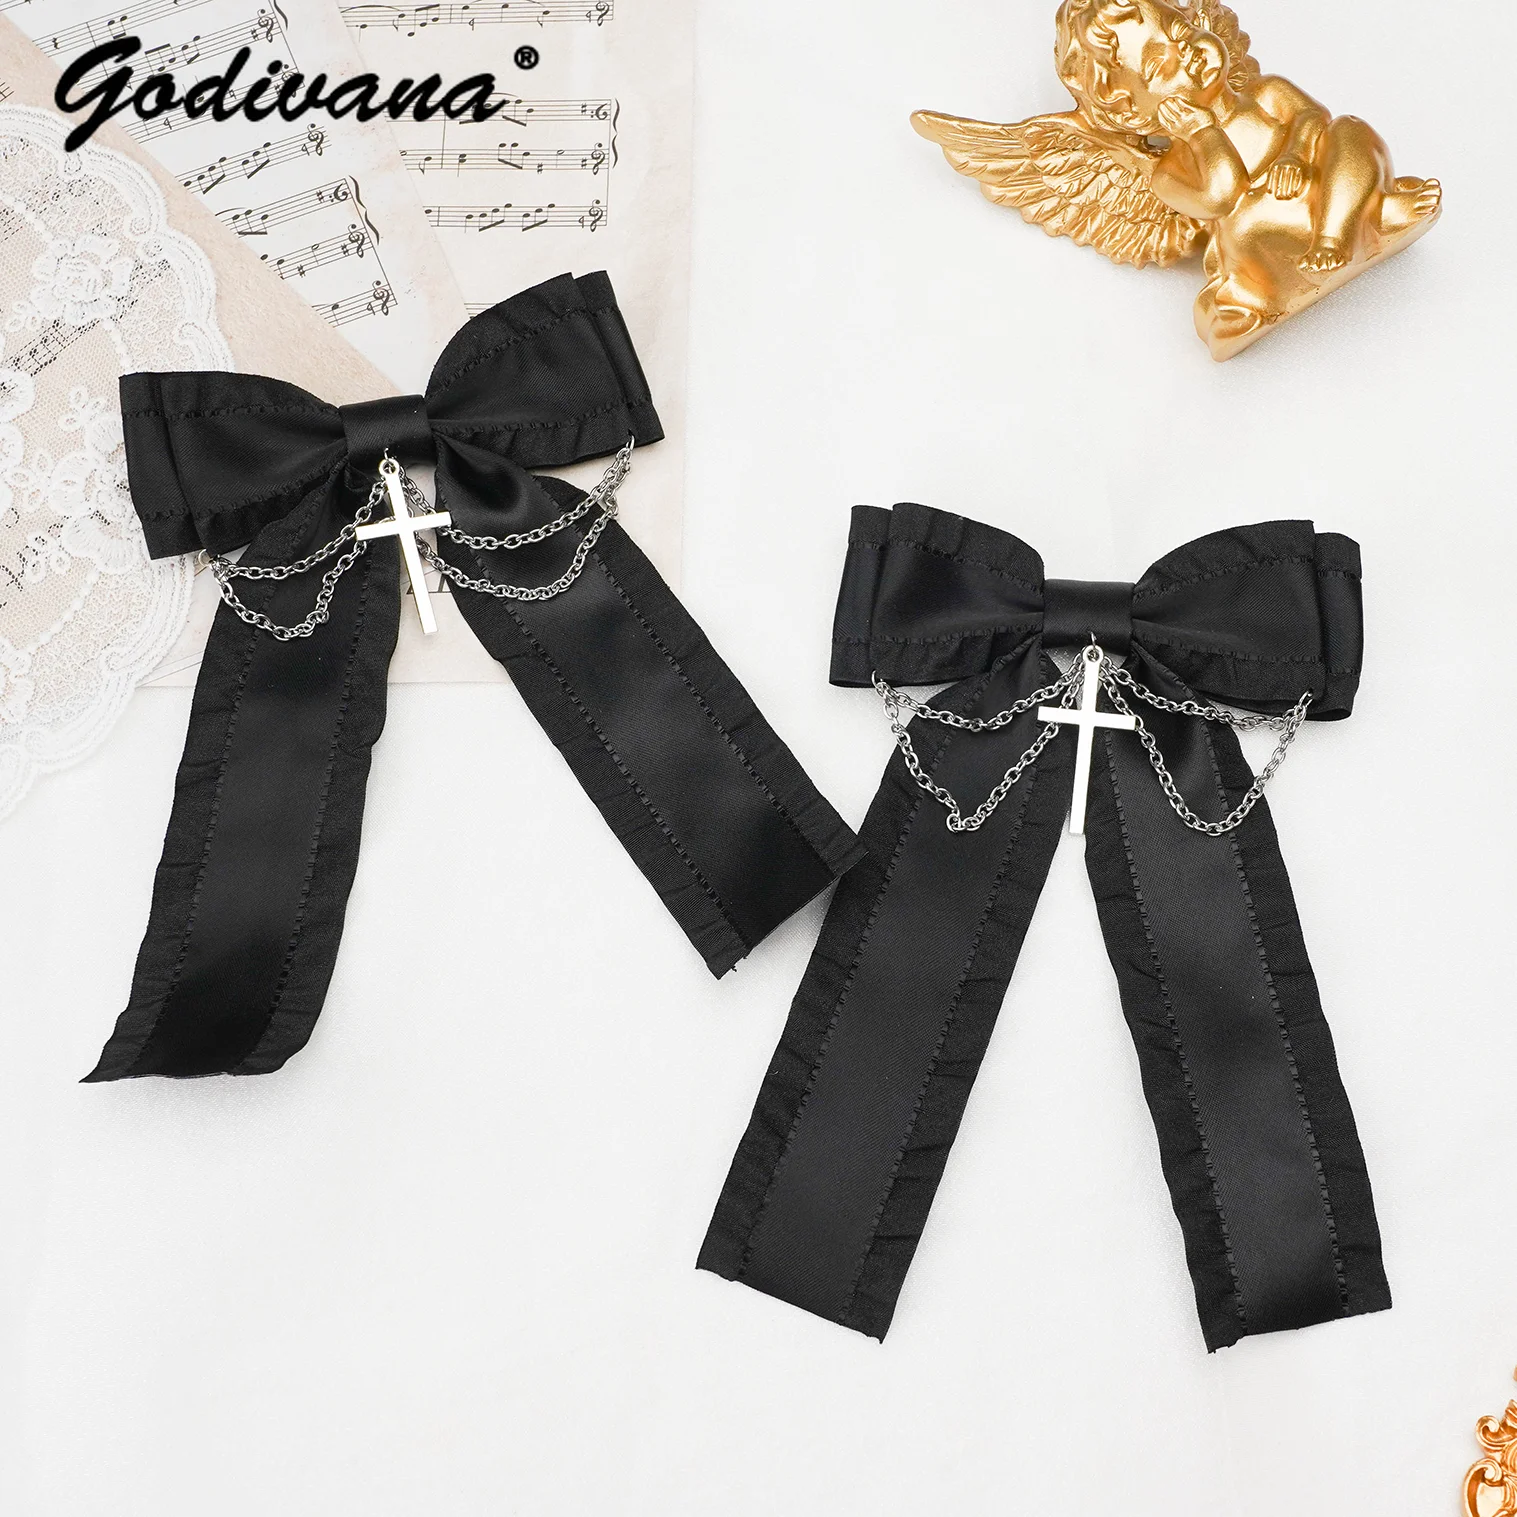 Rojita Hand-Made Mine Gothic Style Lolita Sweet Cross Handmade Chain Brooch Headdress Clip Black Hair Clip Clothes Accessories xy axis manual sliding table linear rail stage manual stage sliding table made of aluminum alloy cross 40x70mm